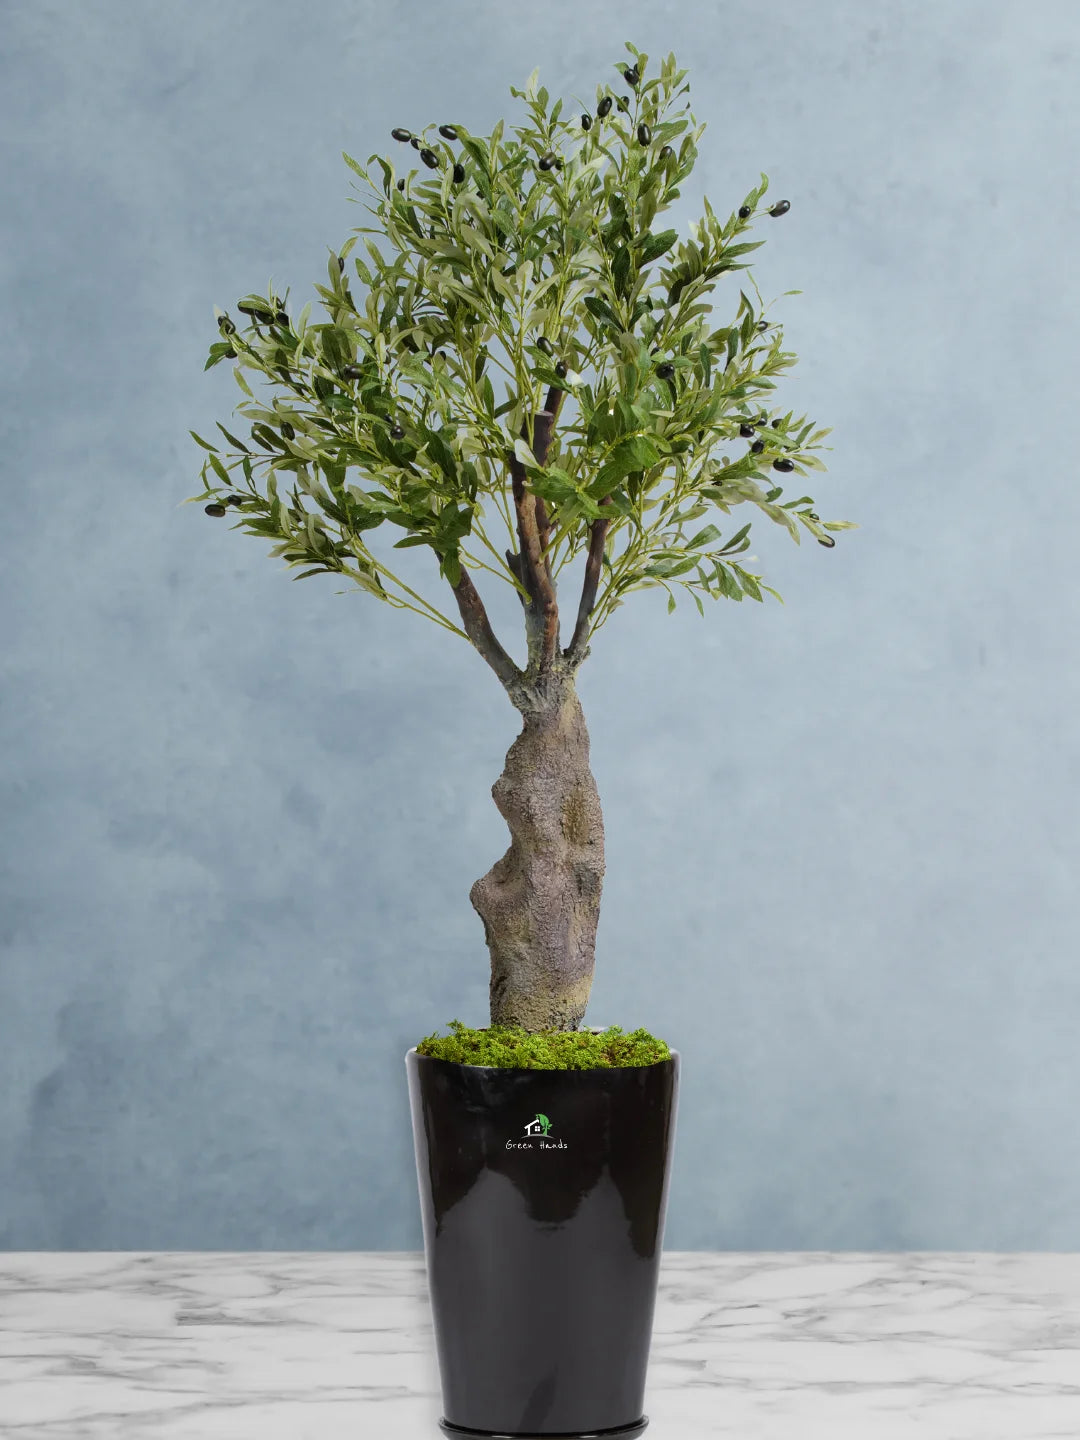 Potted-Artificial-XL-Mature-Olive-Tree-in-Premium-Glossy-Black-Ceramic-Pot